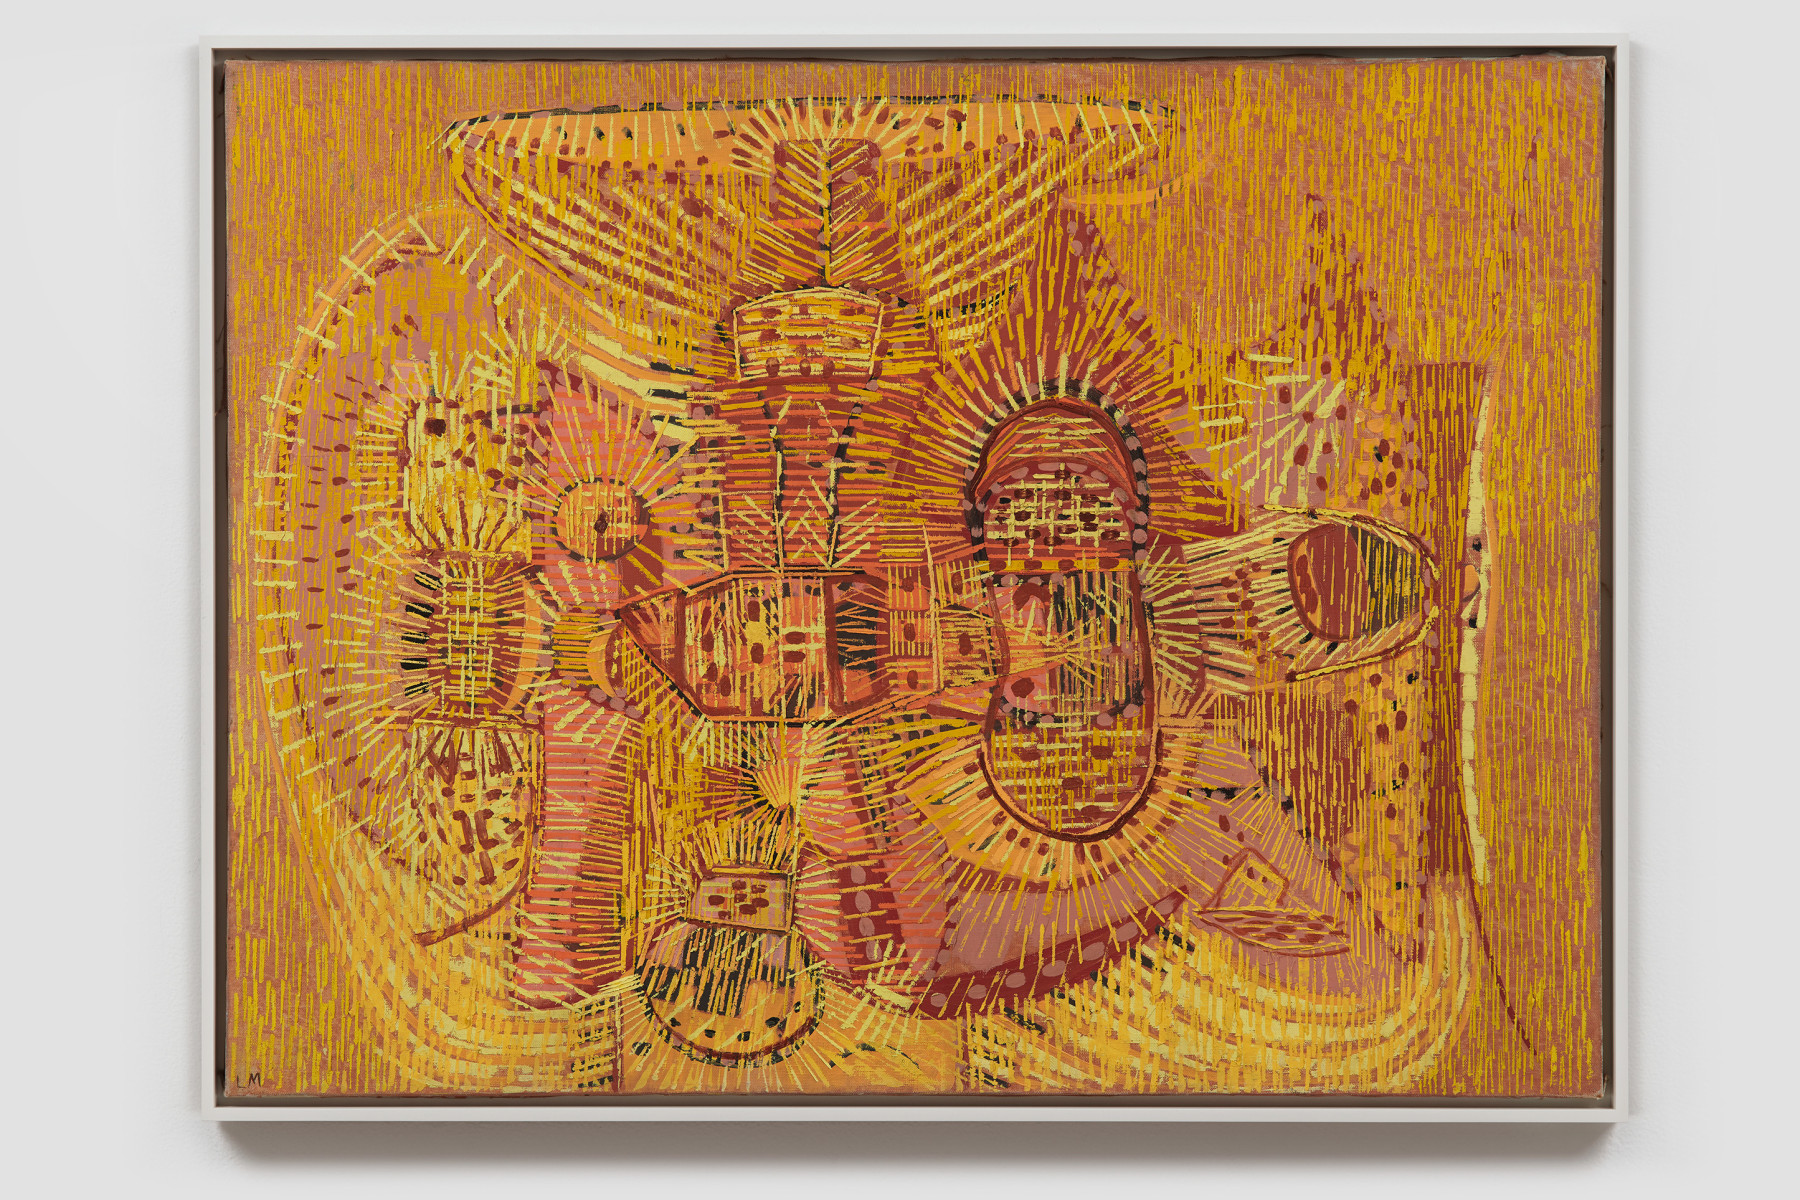 LEE MULLICAN Section Implanted, 1948